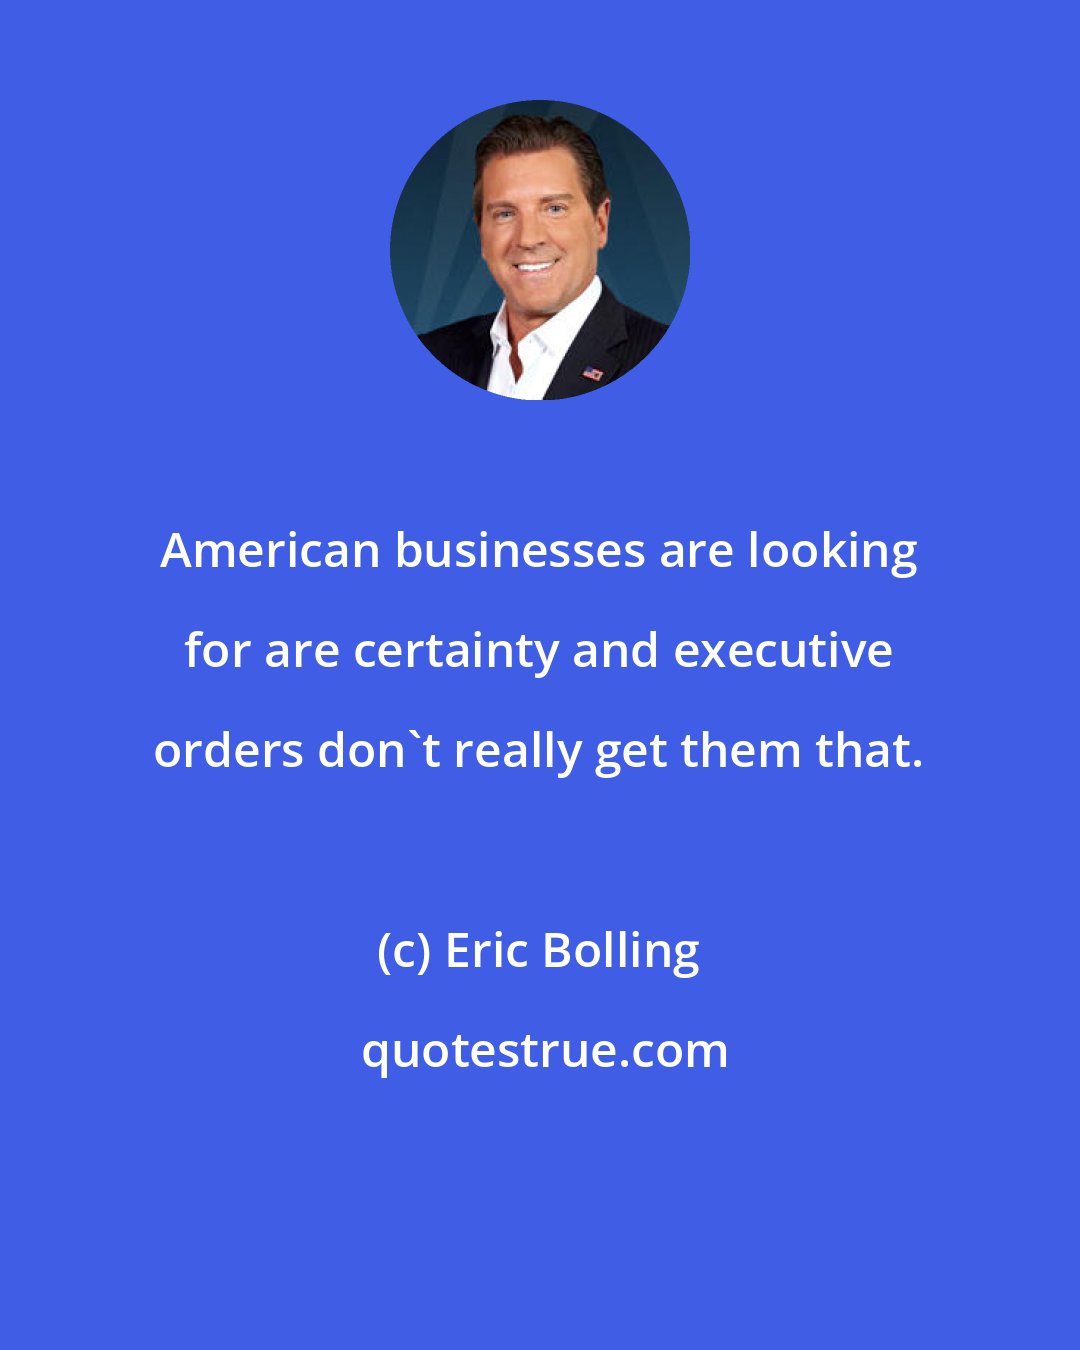 Eric Bolling: American businesses are looking for are certainty and executive orders don't really get them that.